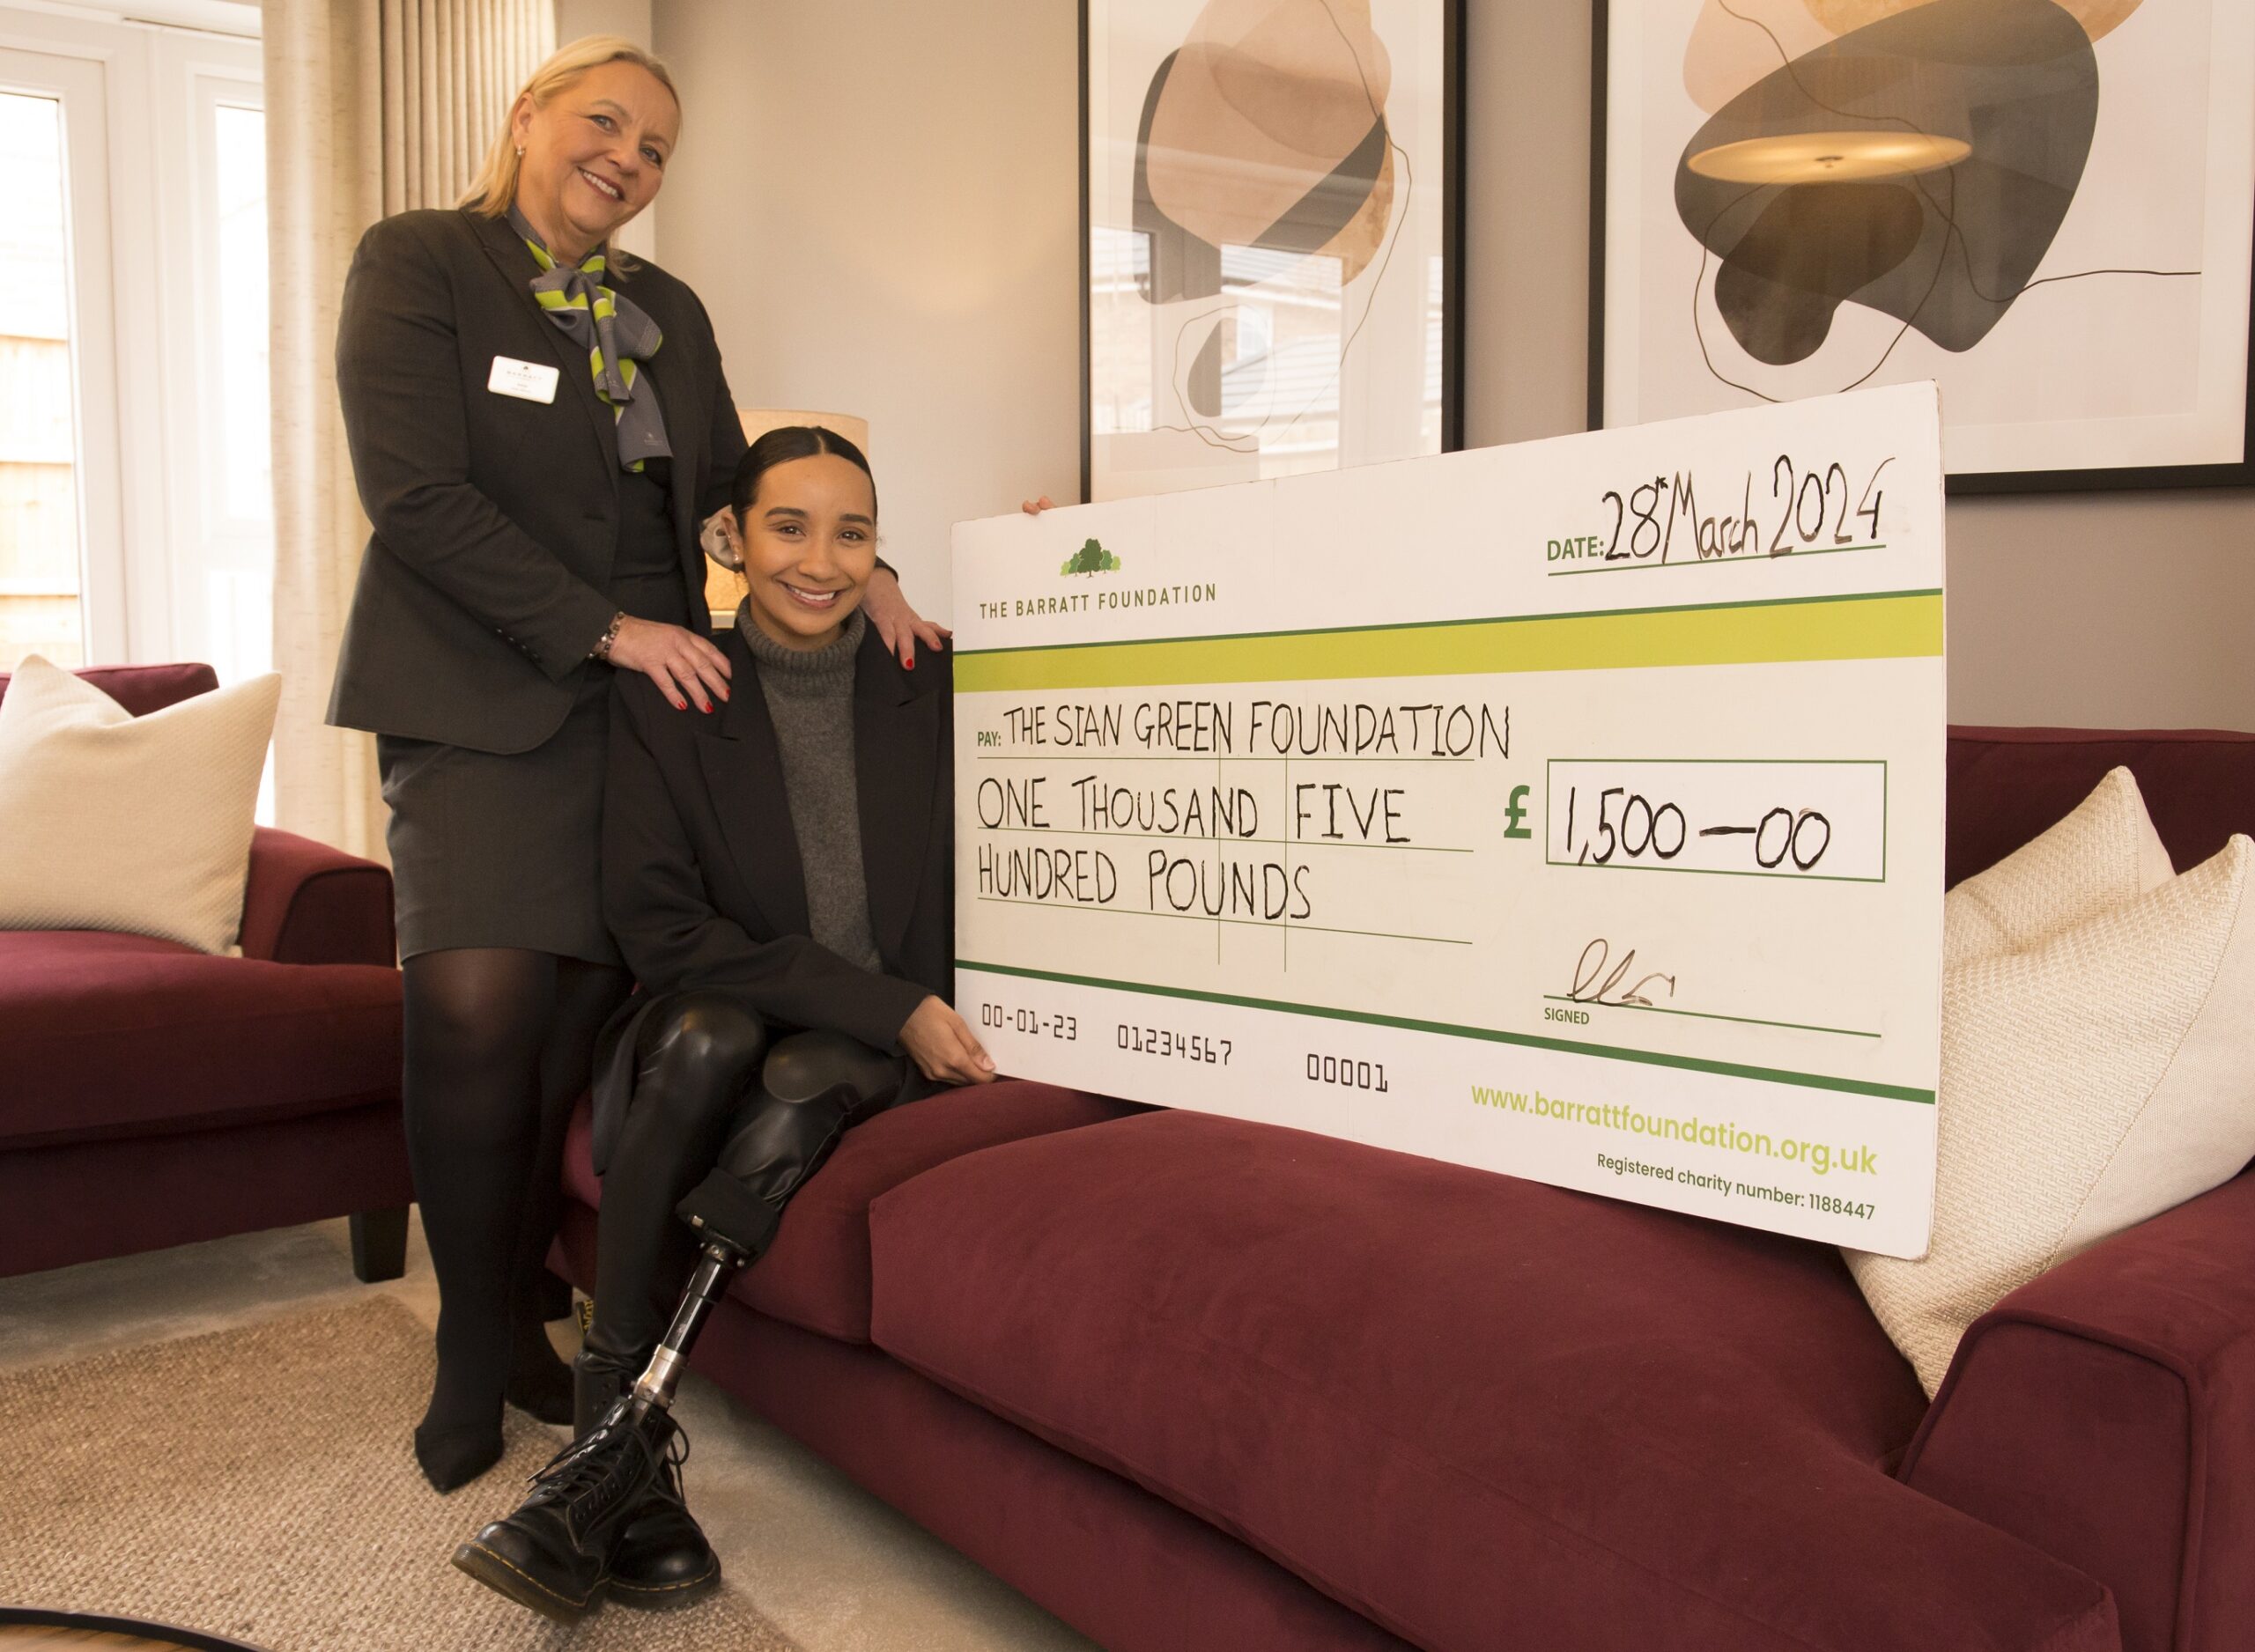 LEICESTERSHIRE HOMEBUILDER GIFTS £1,500 TO HELP CHARITY EMPOWER AMPUTEES